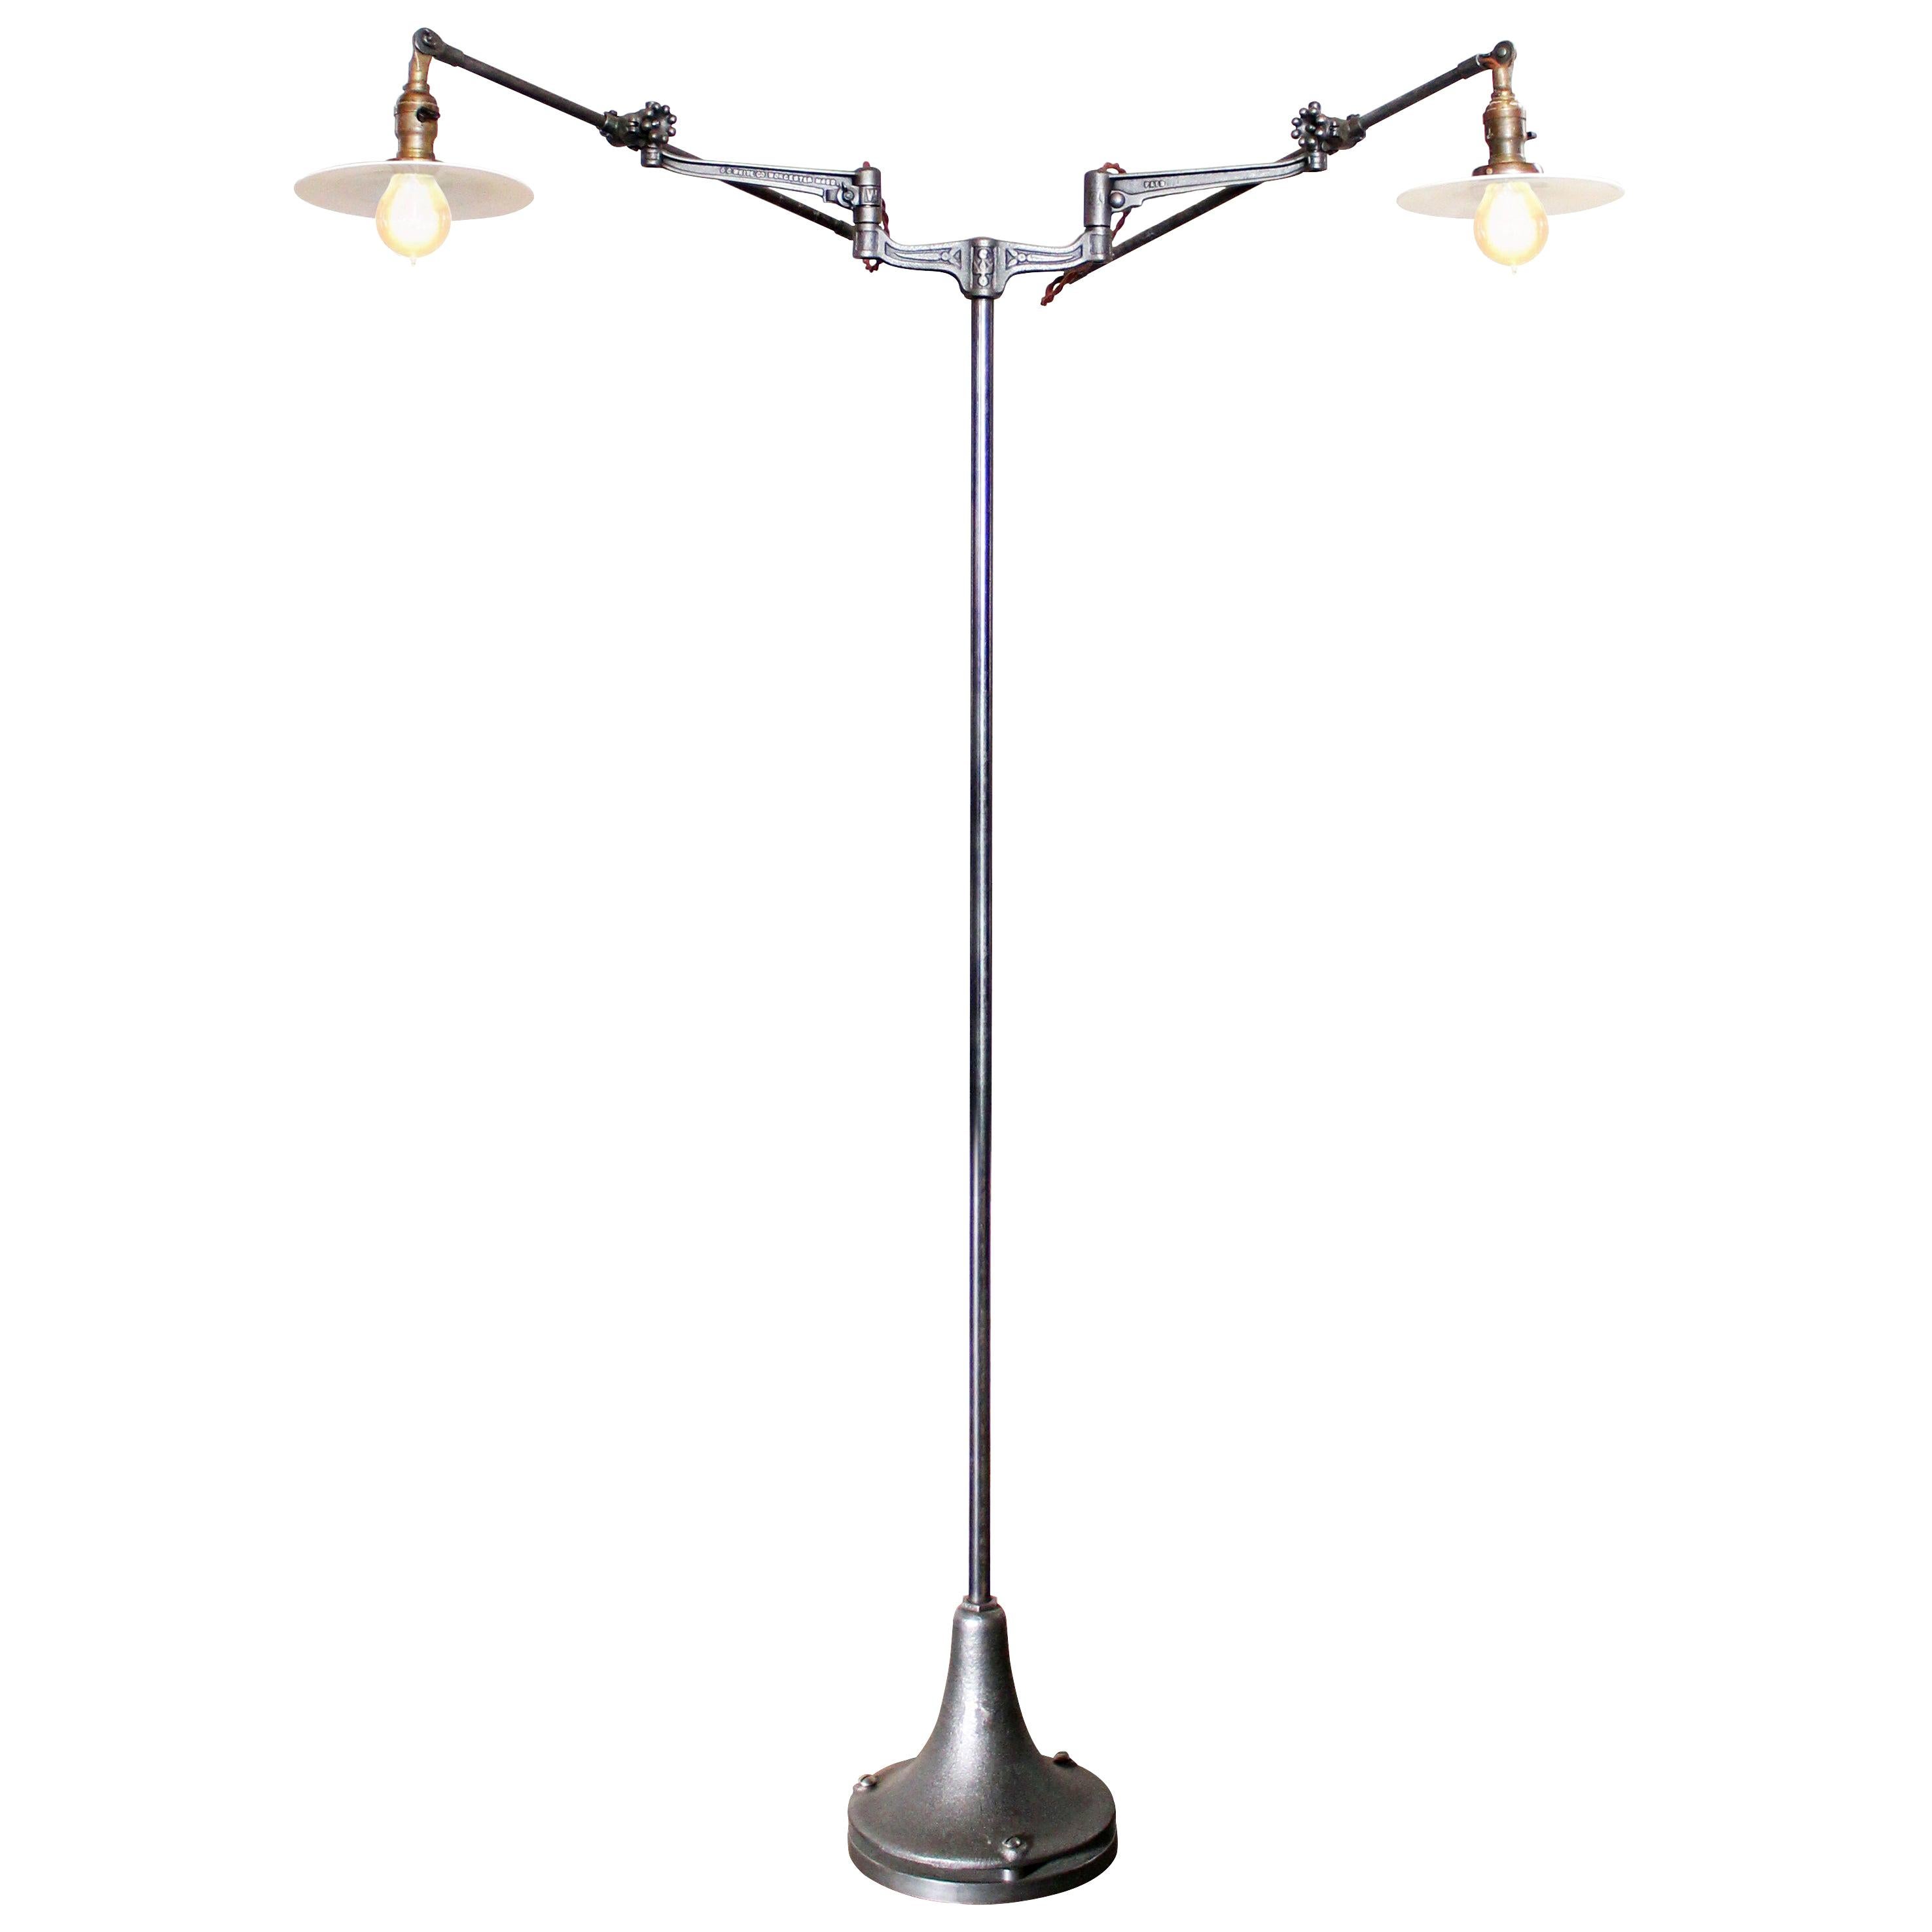 Double-Arm Milk-Glass Reading Lamp Adjustable Cast-Iron Vintage Factory Lighting For Sale